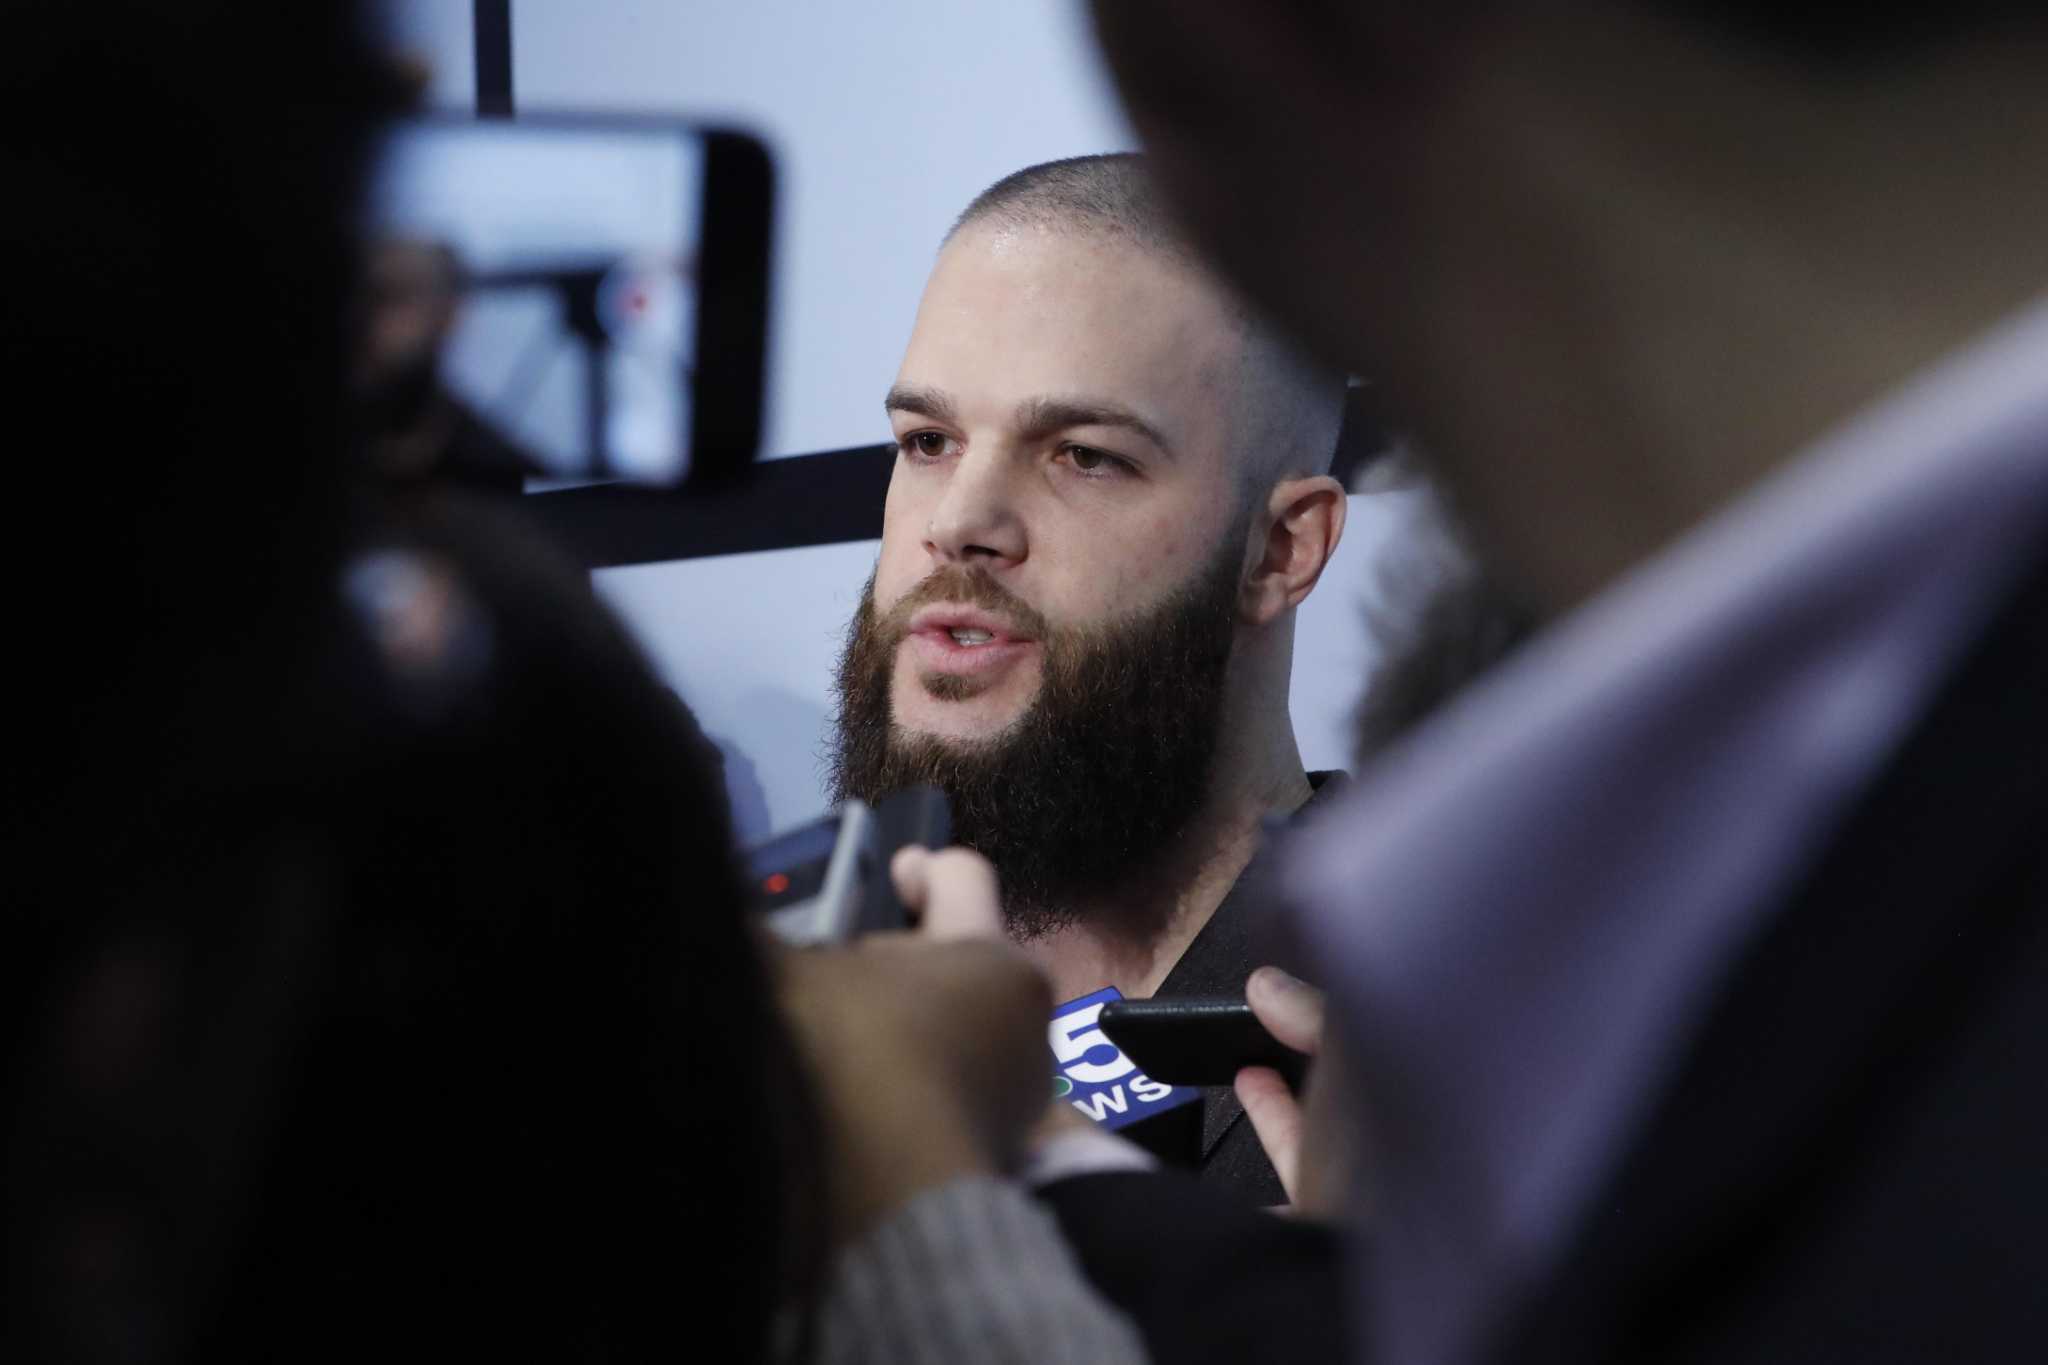 First Astros player apology comes from former pitcher Dallas Keuchel